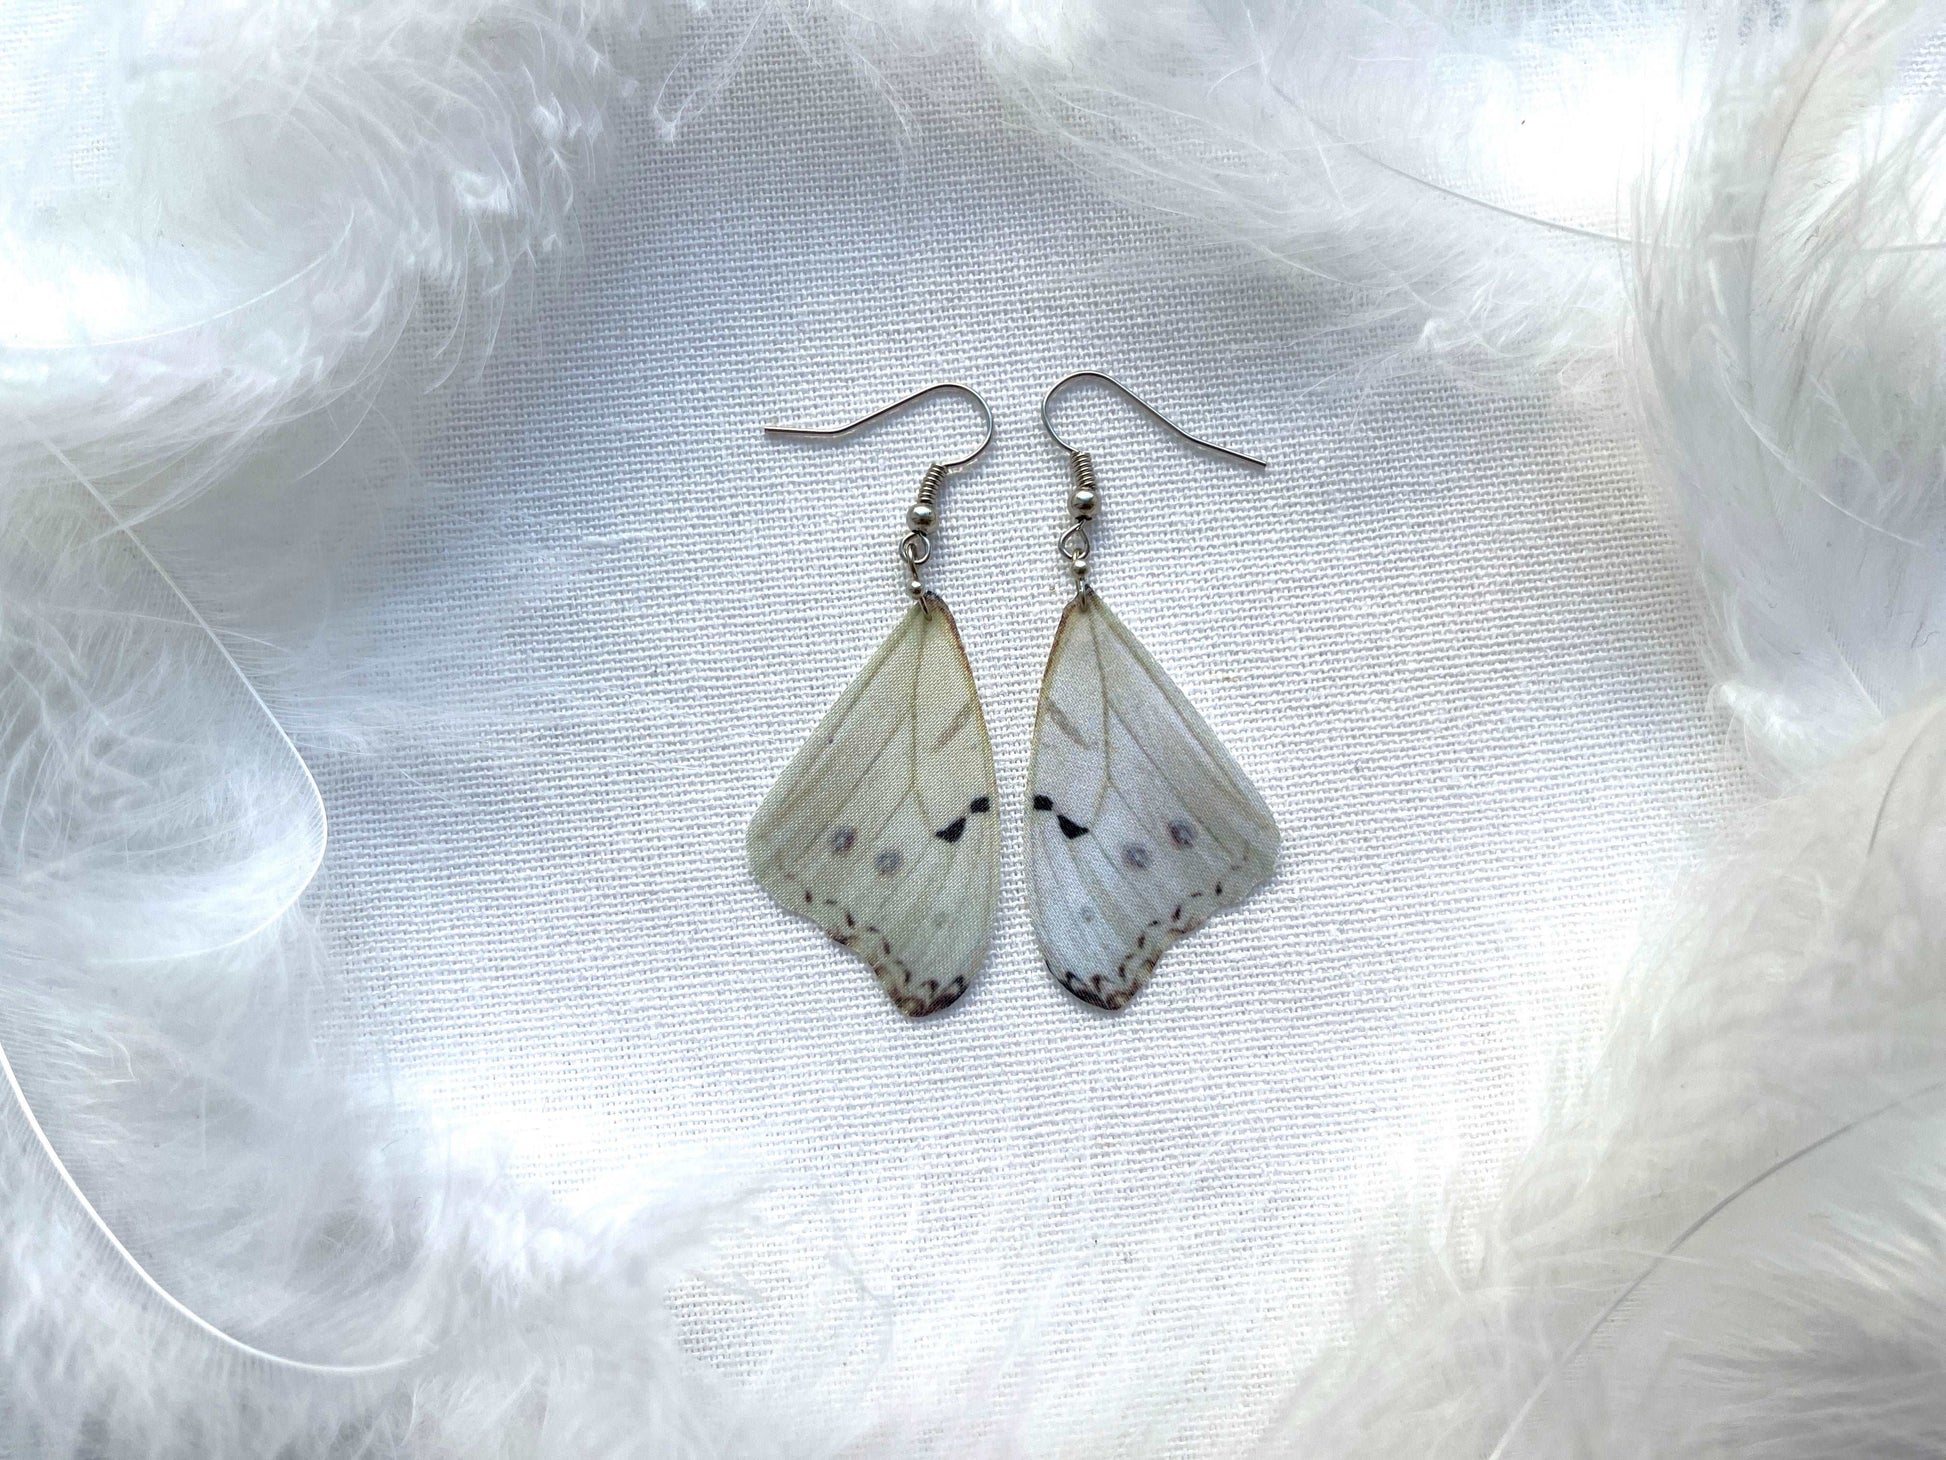 Stylish and Unique Butterfly Earrings with Whimsical Charm